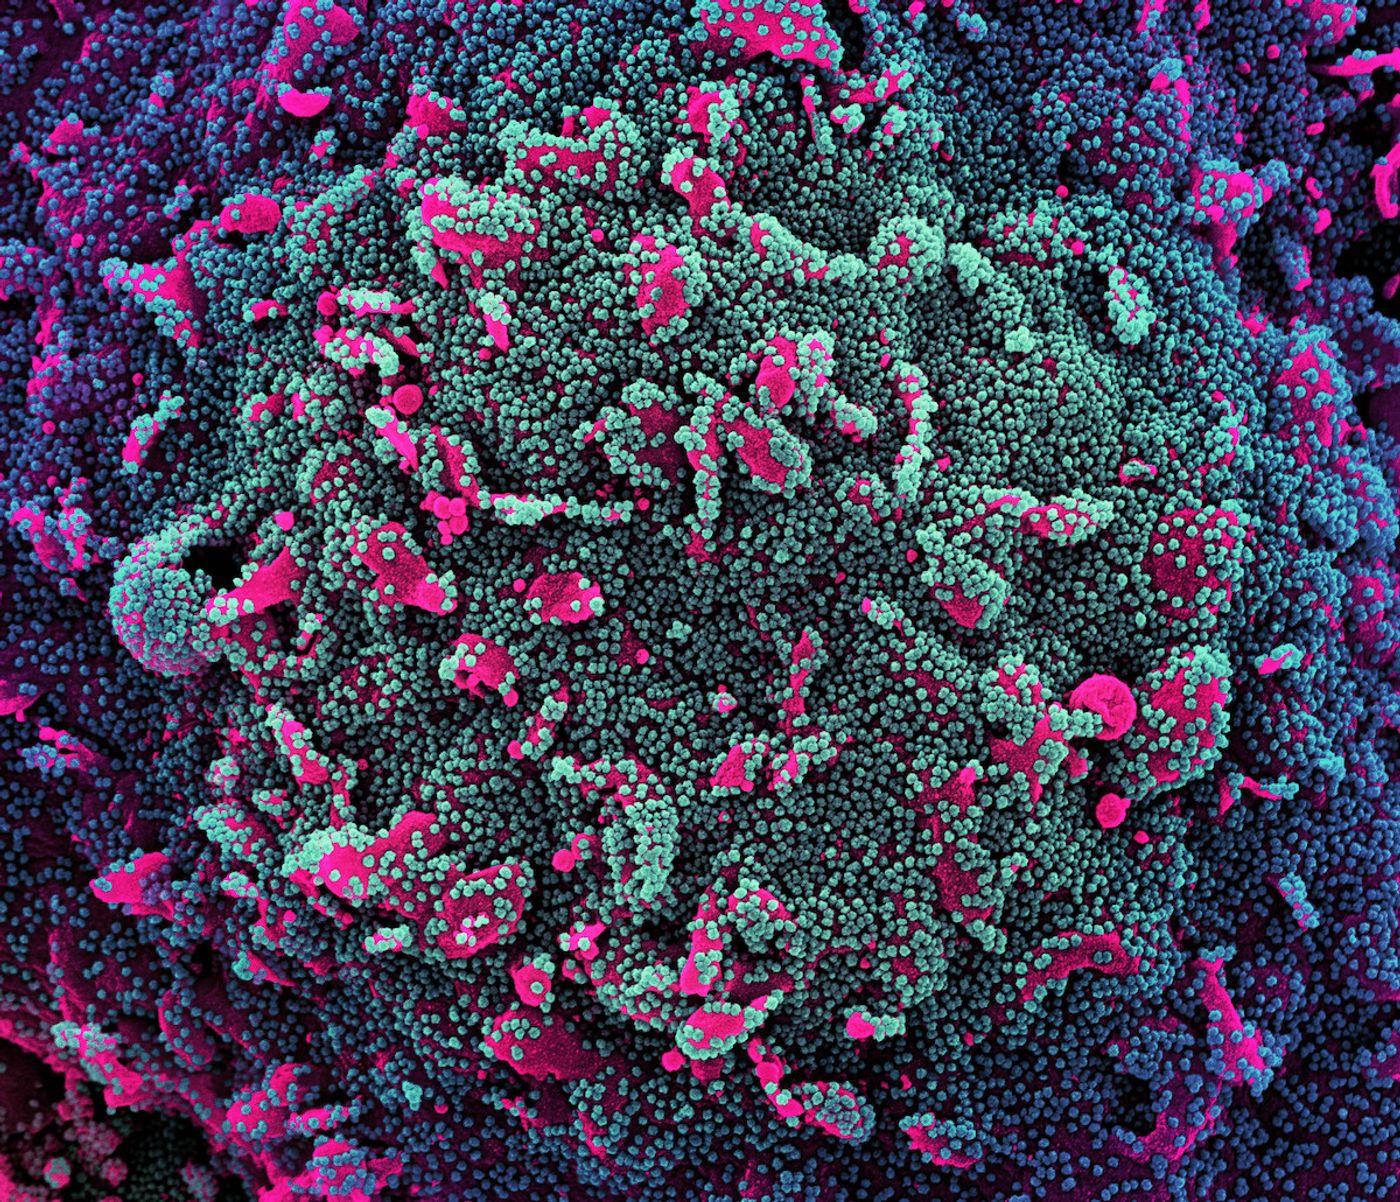 Colorized scanning electron micrograph of a cell (pink) heavily infected with SARS-CoV-2 virus particles (teal and purple), isolated from a patient sample. Image captured at the NIAID Integrated Research Facility (IRF) in Fort Detrick, Maryland. / Credit: NIAID 